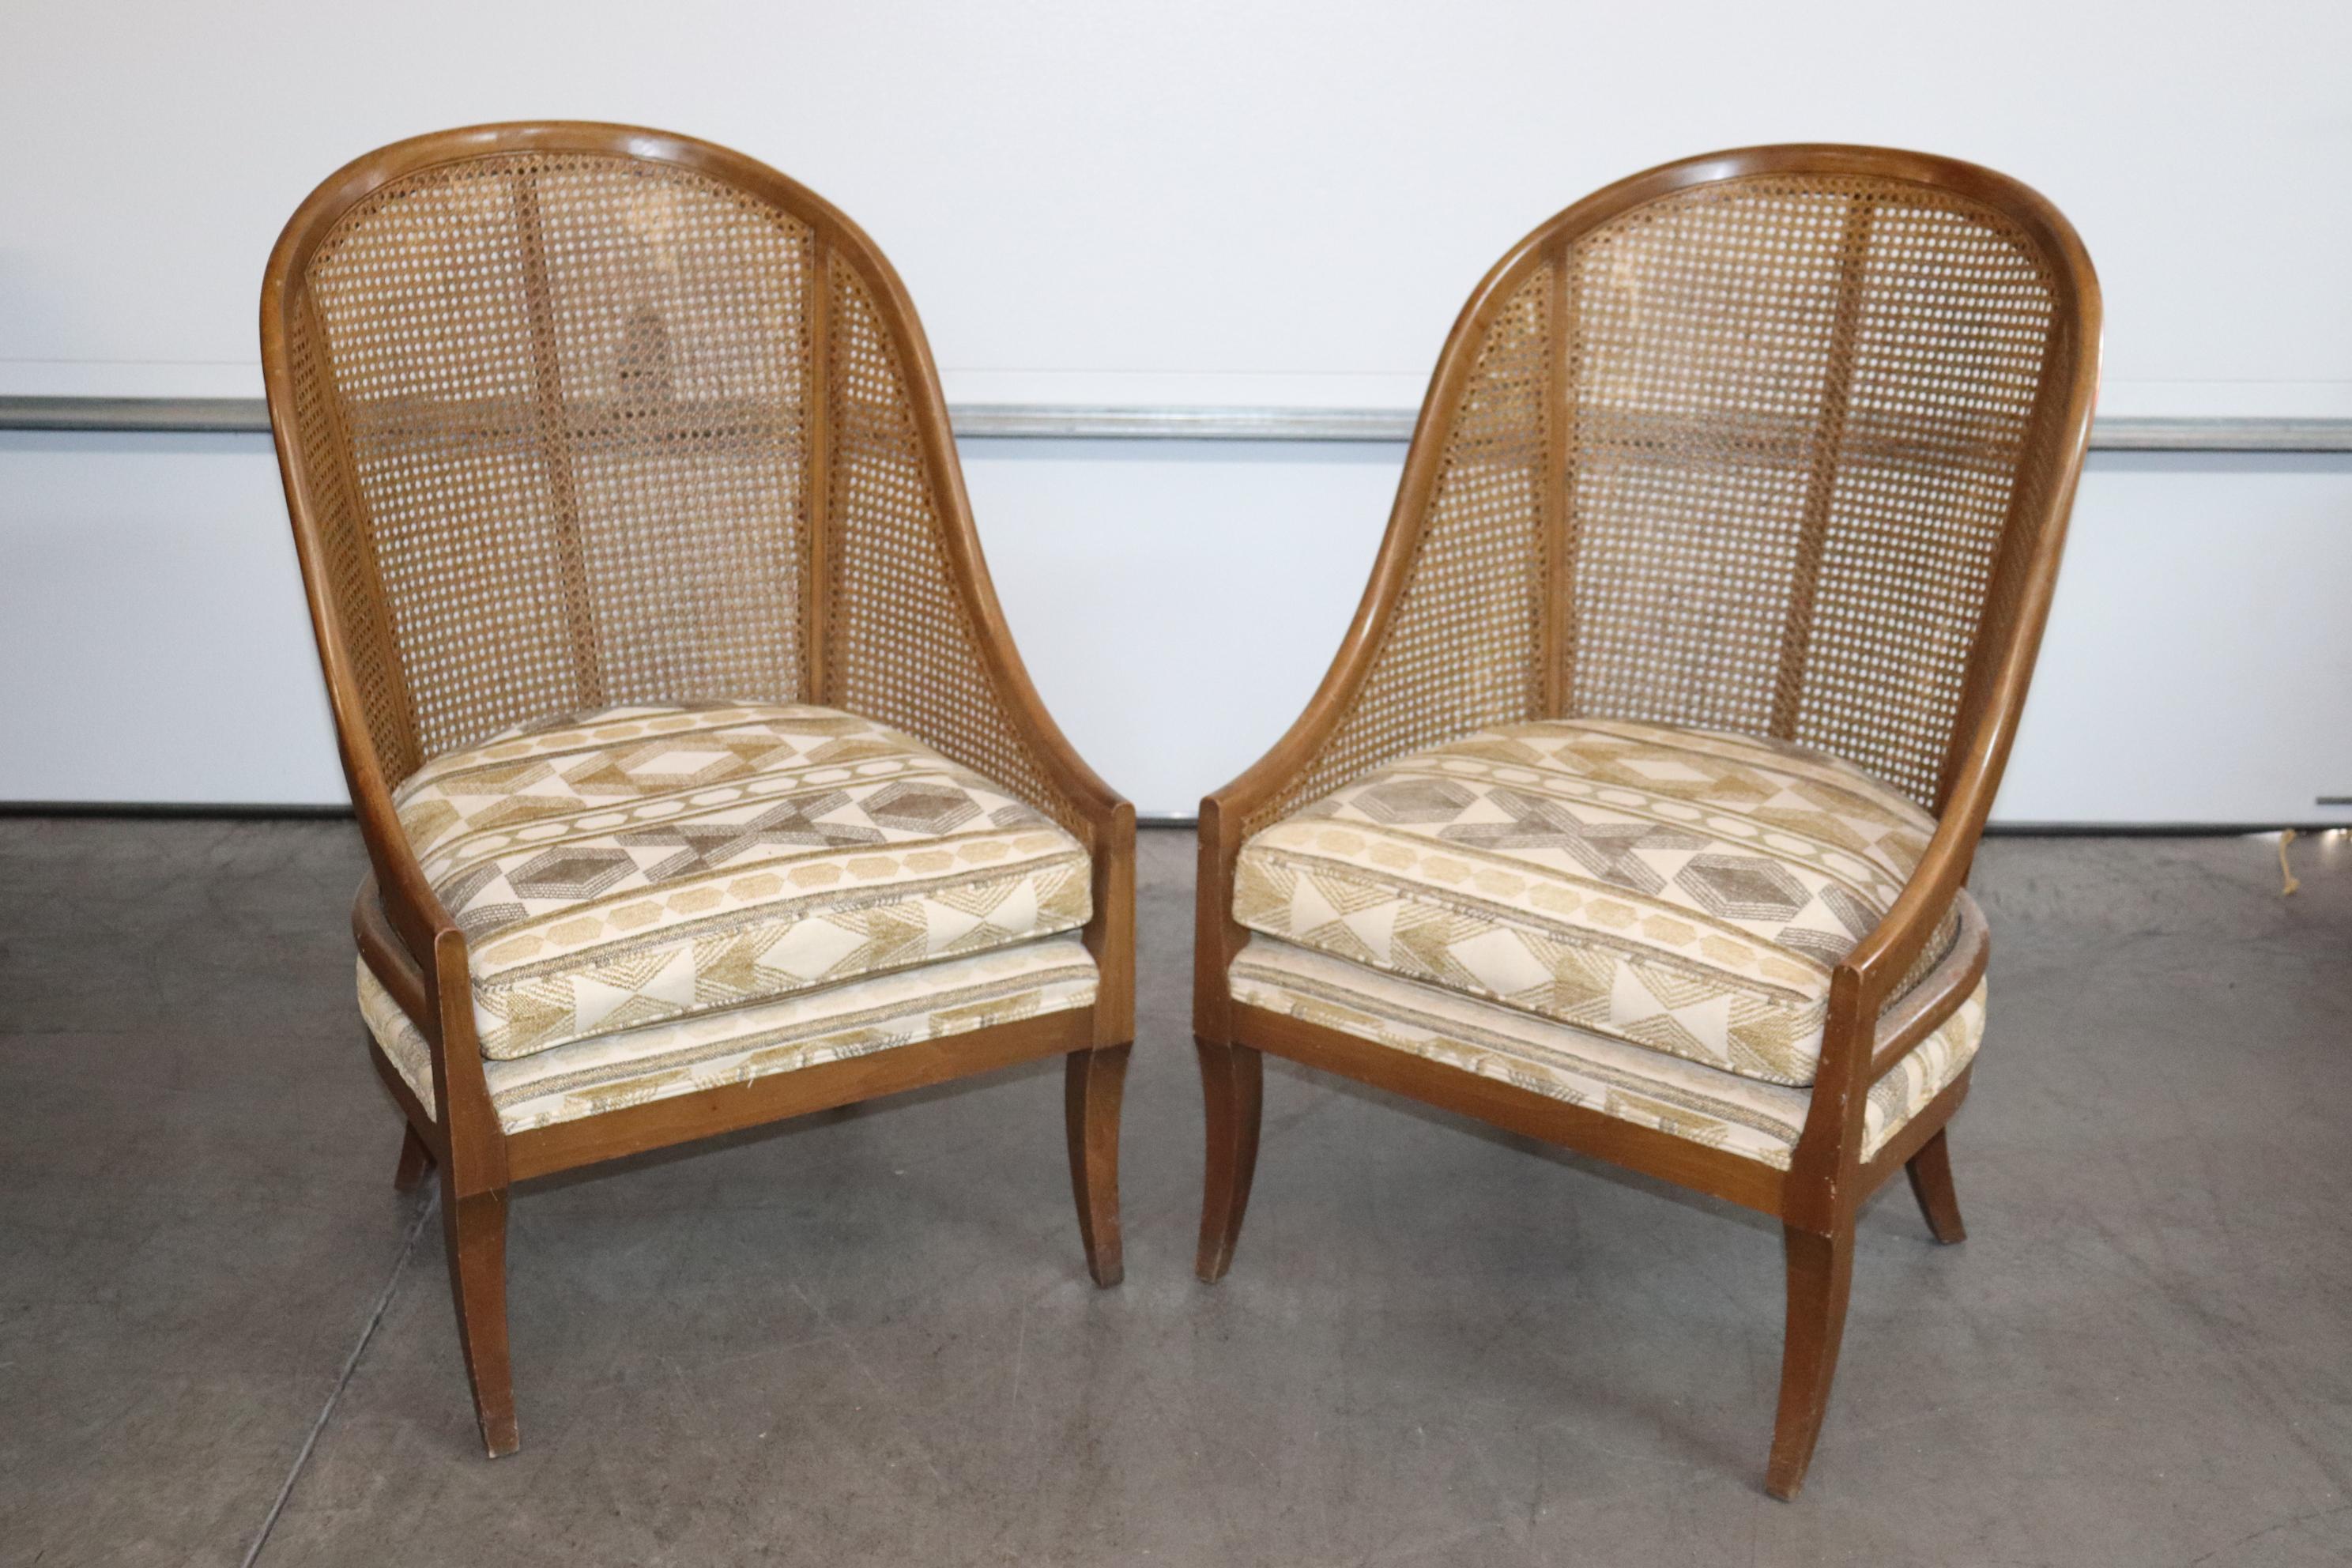 This is a unique pair of English Regency style cane back tub style bergere chairs. The chairs are in their original vintage condition with minor wear to the cane as shown in the photos. The cane is fine but the finish or lacquer has some wear. The